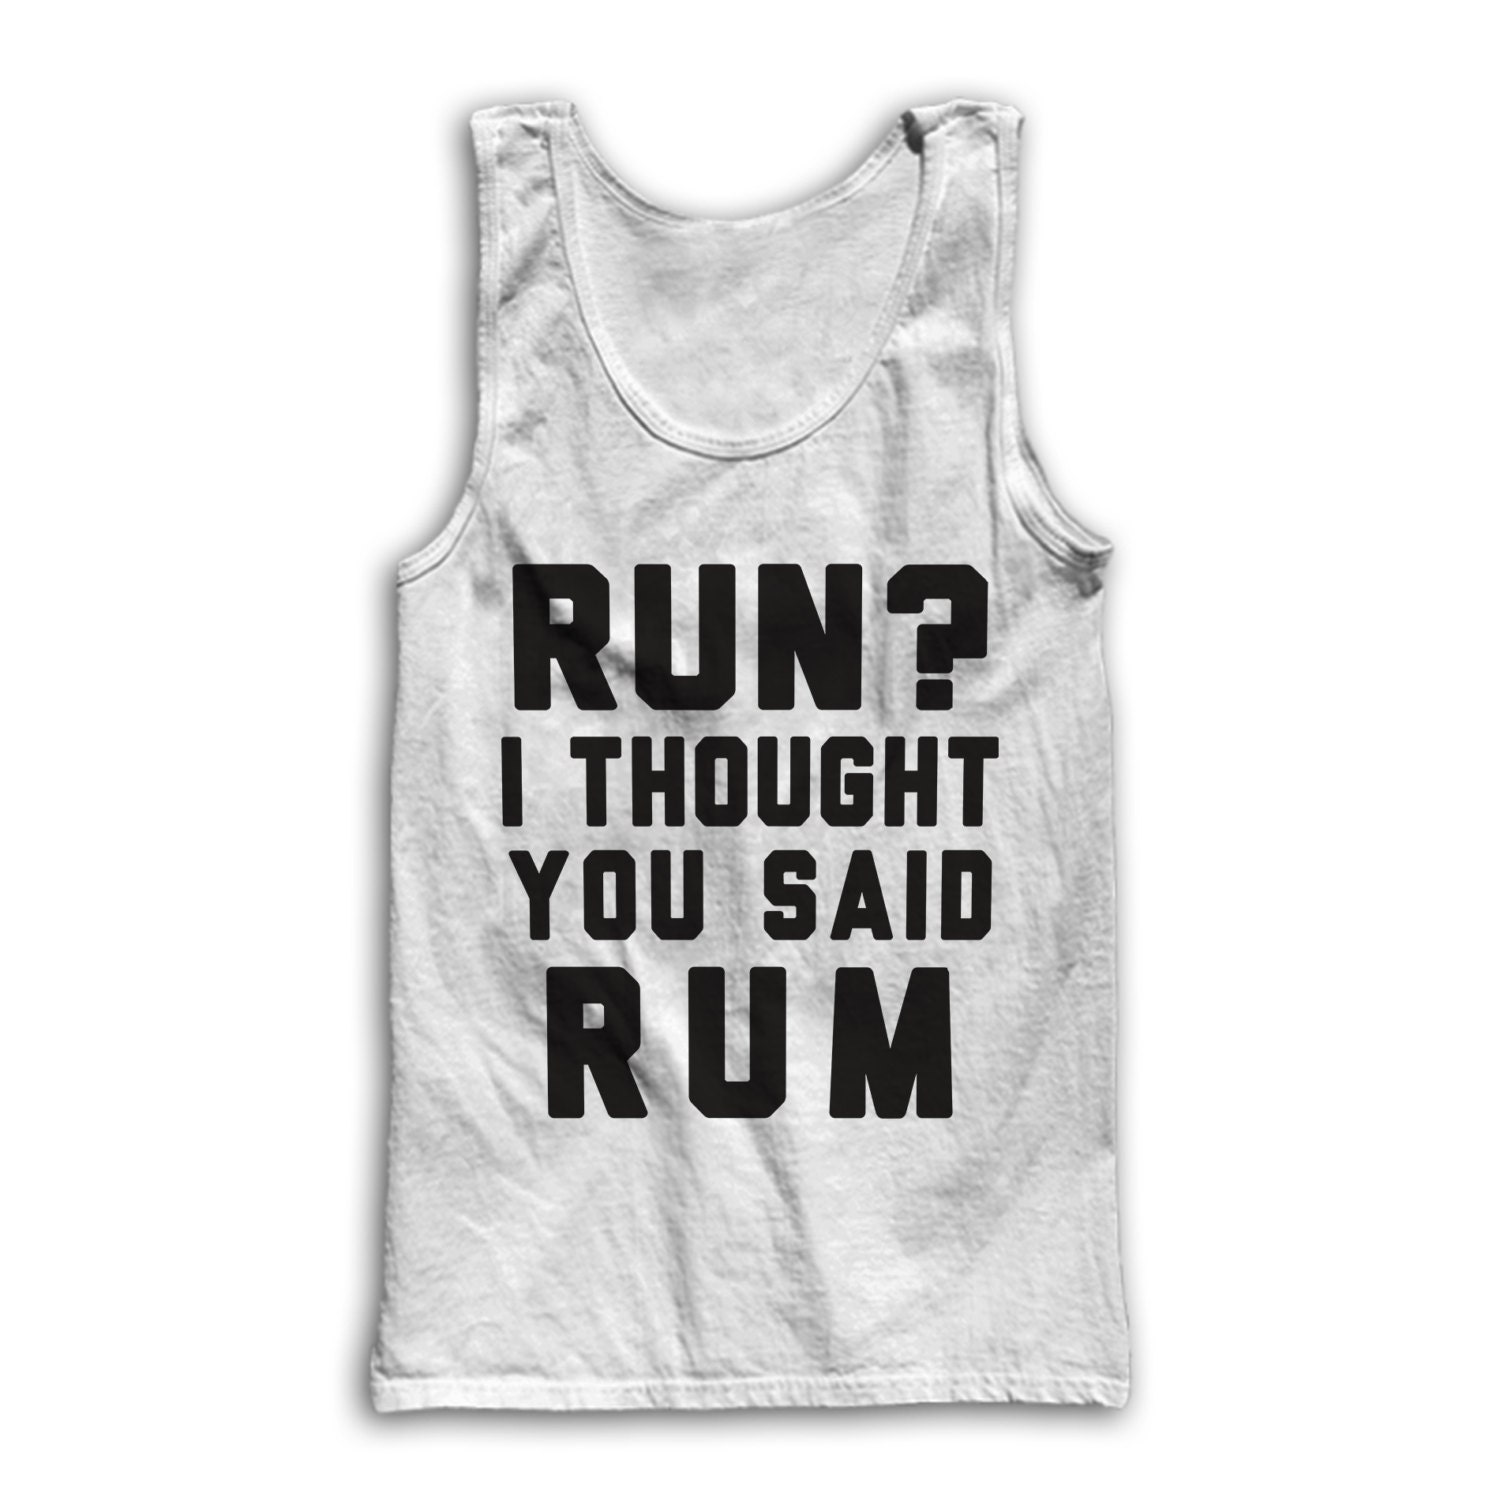 Run I Thought You Said RUM by AwesomeBestFriendsTs on Etsy